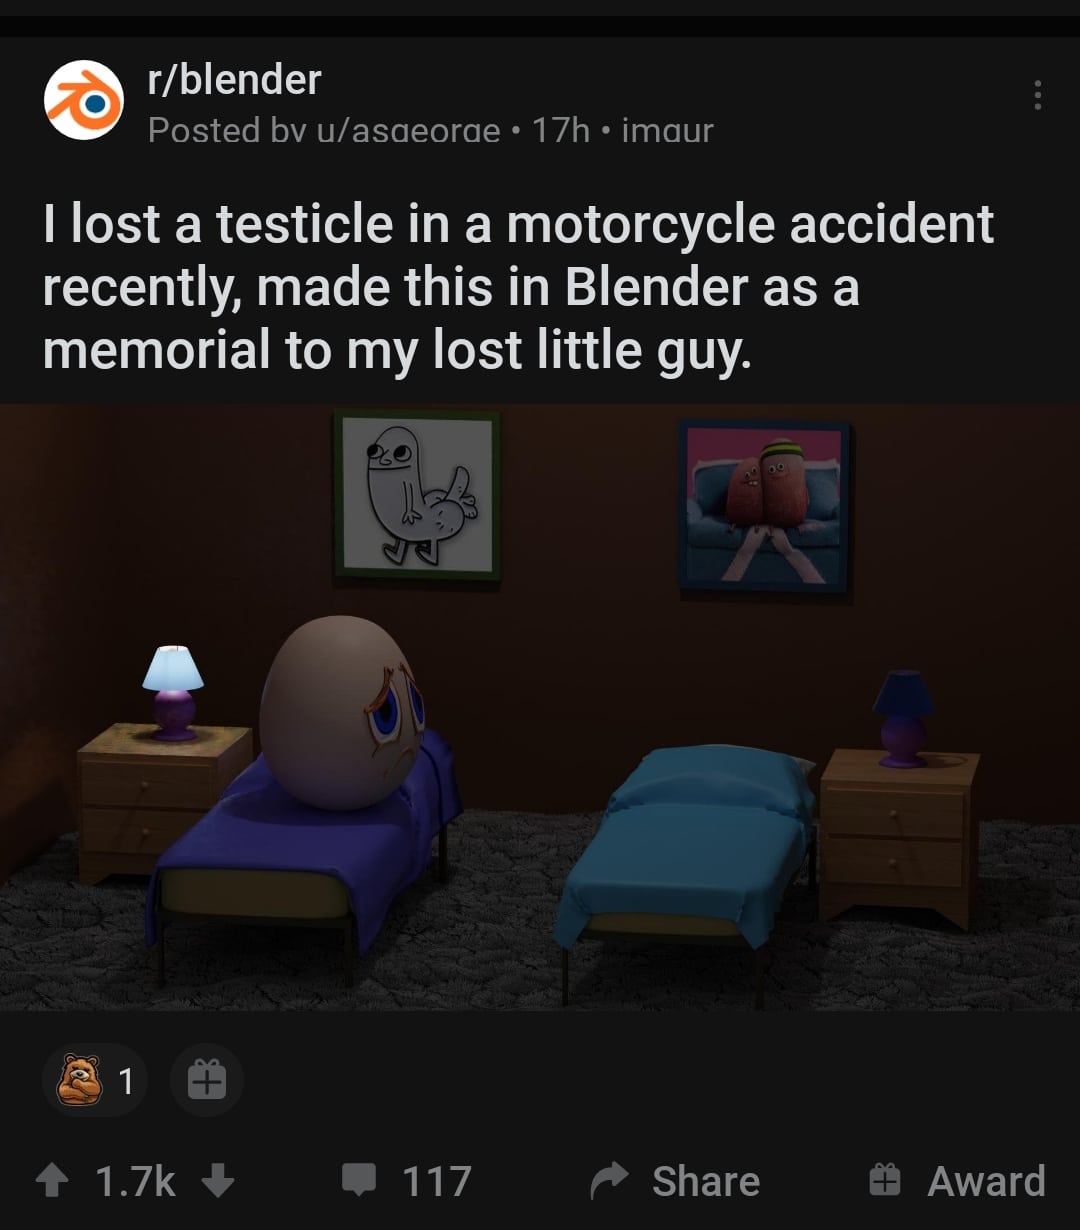 Cringe, Testicle, RIP, IP cringe memes Cringe, Testicle, RIP, IP text: r/blender Posted bv u/asaeorae • 17h • imaur I lost a testicle in a motorcycle accident recently, made this in Blender as a memorial to my lost little guy. 1.7k 117 Share 9 Award 